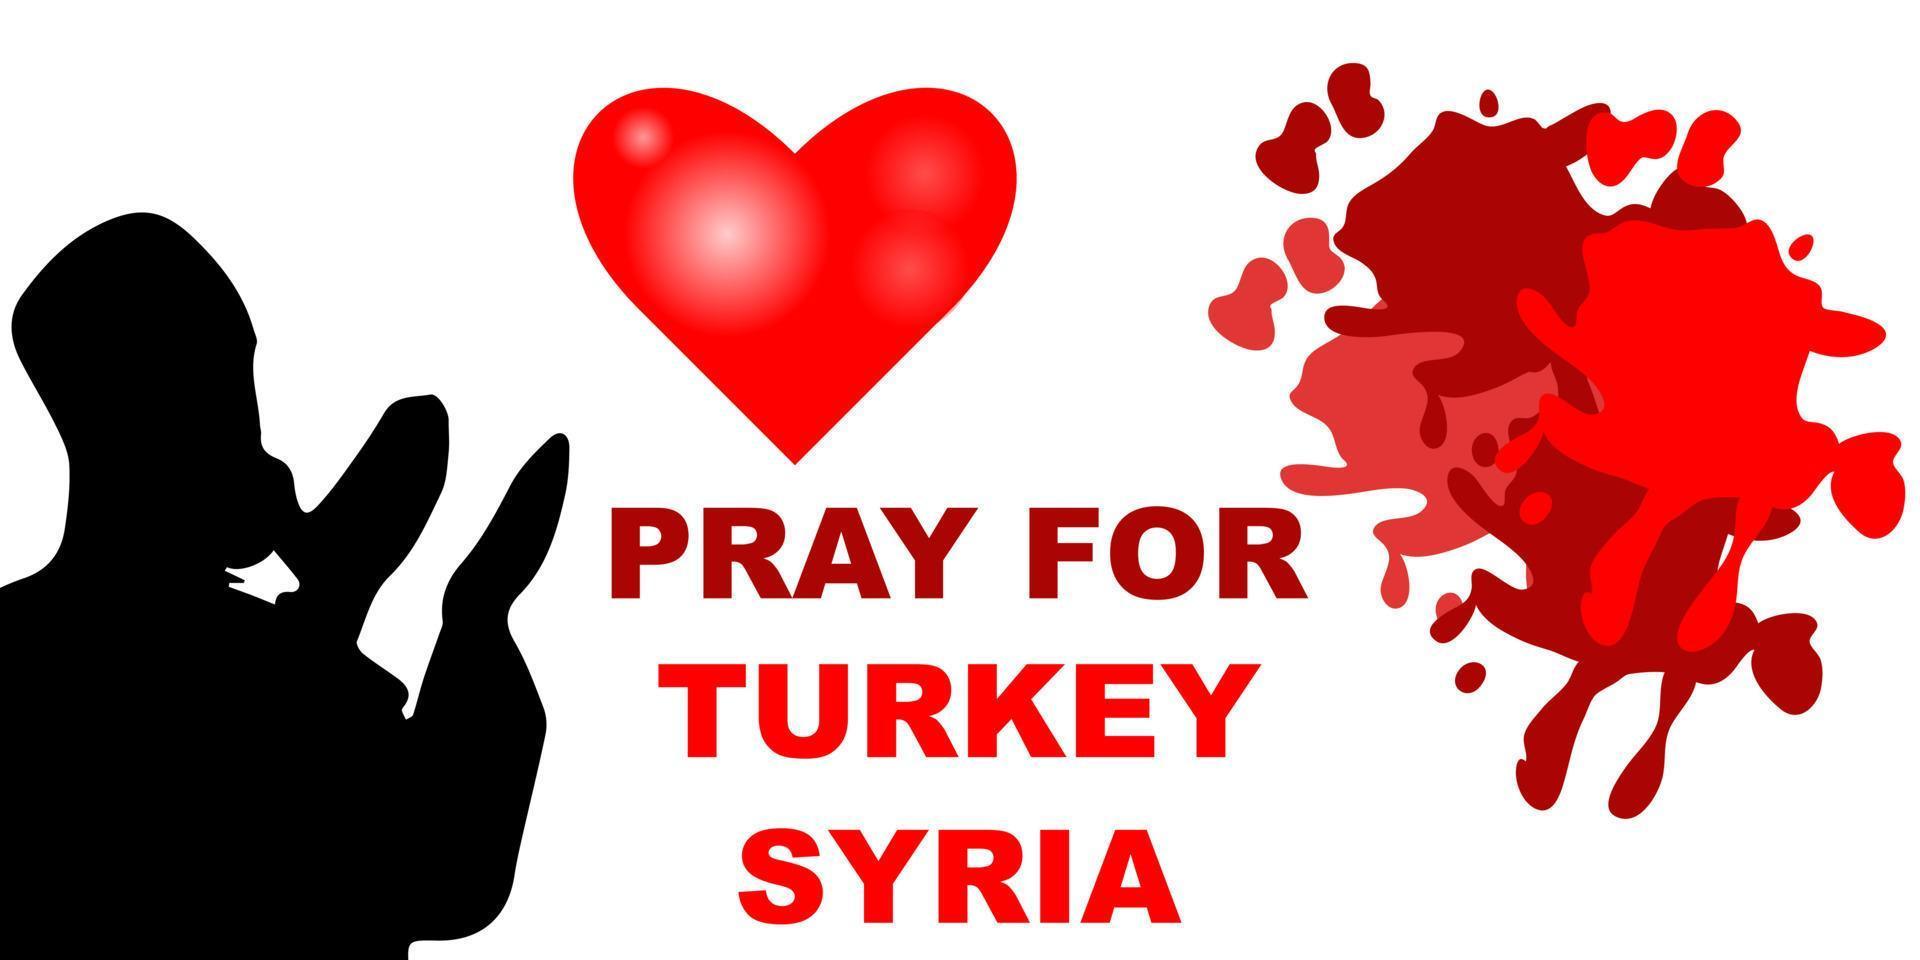 Pray for Turkey and Syria Earthquake disaster victims Save life.  Support and show solidarity with the Turkish and Syrian people. Turkey map, Syria Map. Turkey Flag, Syria Flag. prays due Help People. vector